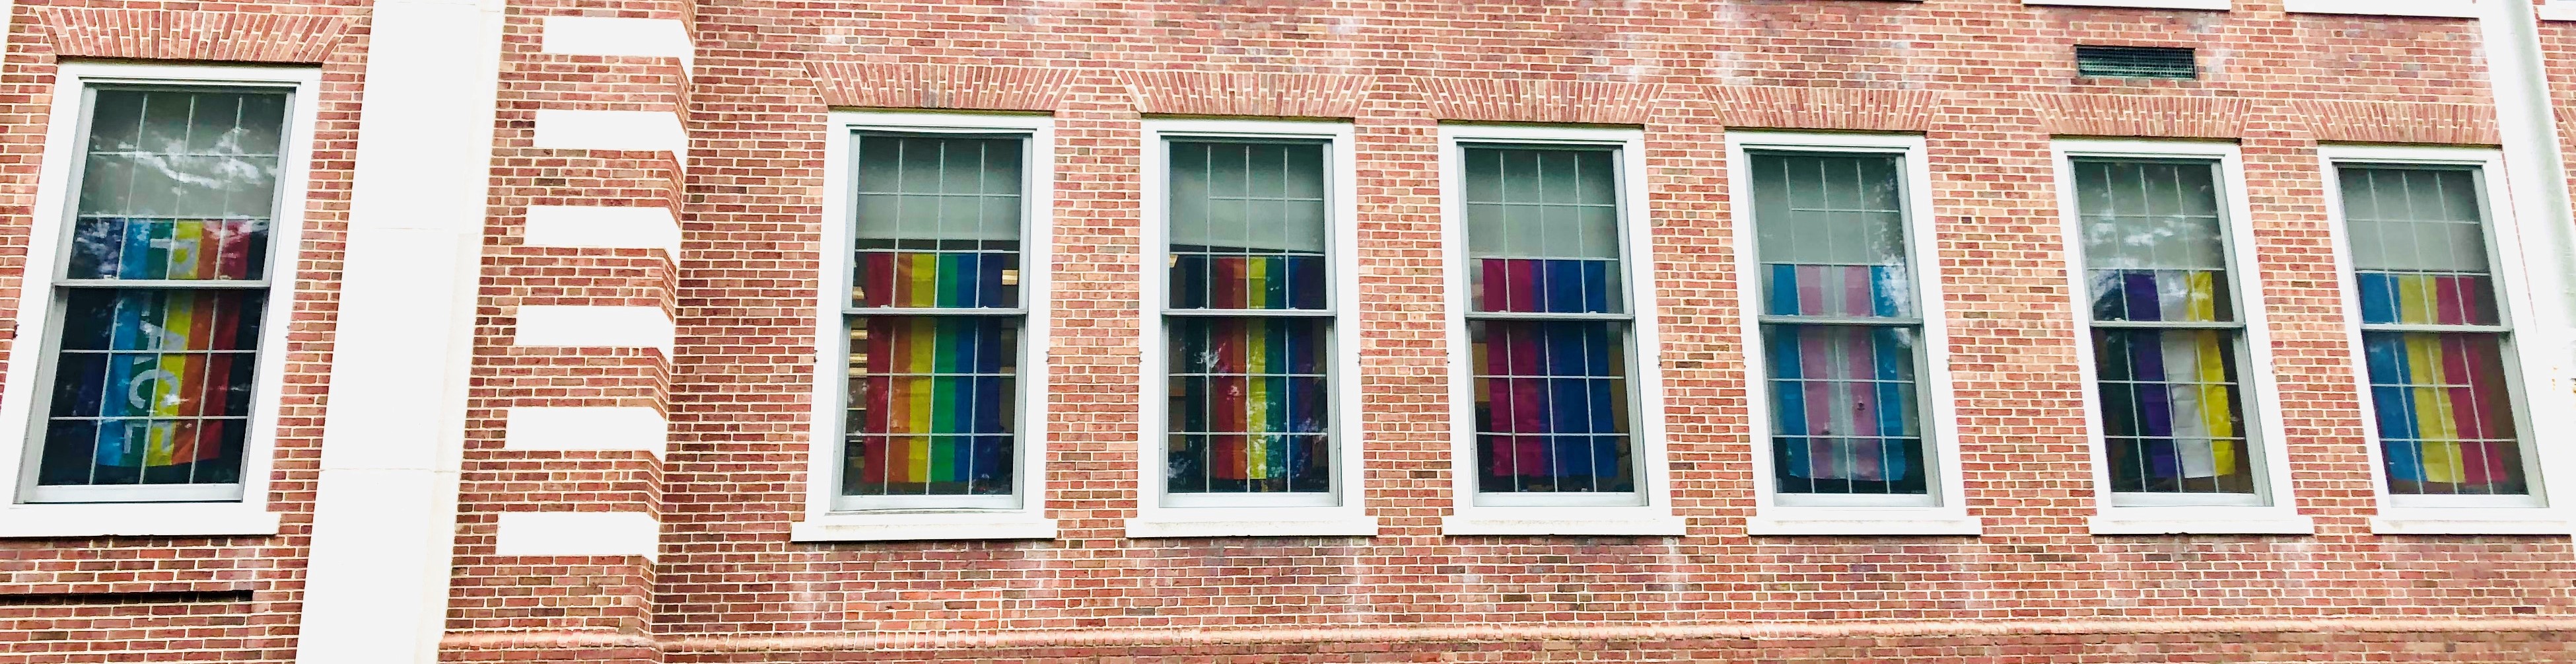 lgbtq pride flags in HR windows. from left to right: rainbow peace, rainbow, Philadelphia pride, bisexuality, transgender, nonbinary, pansexuality